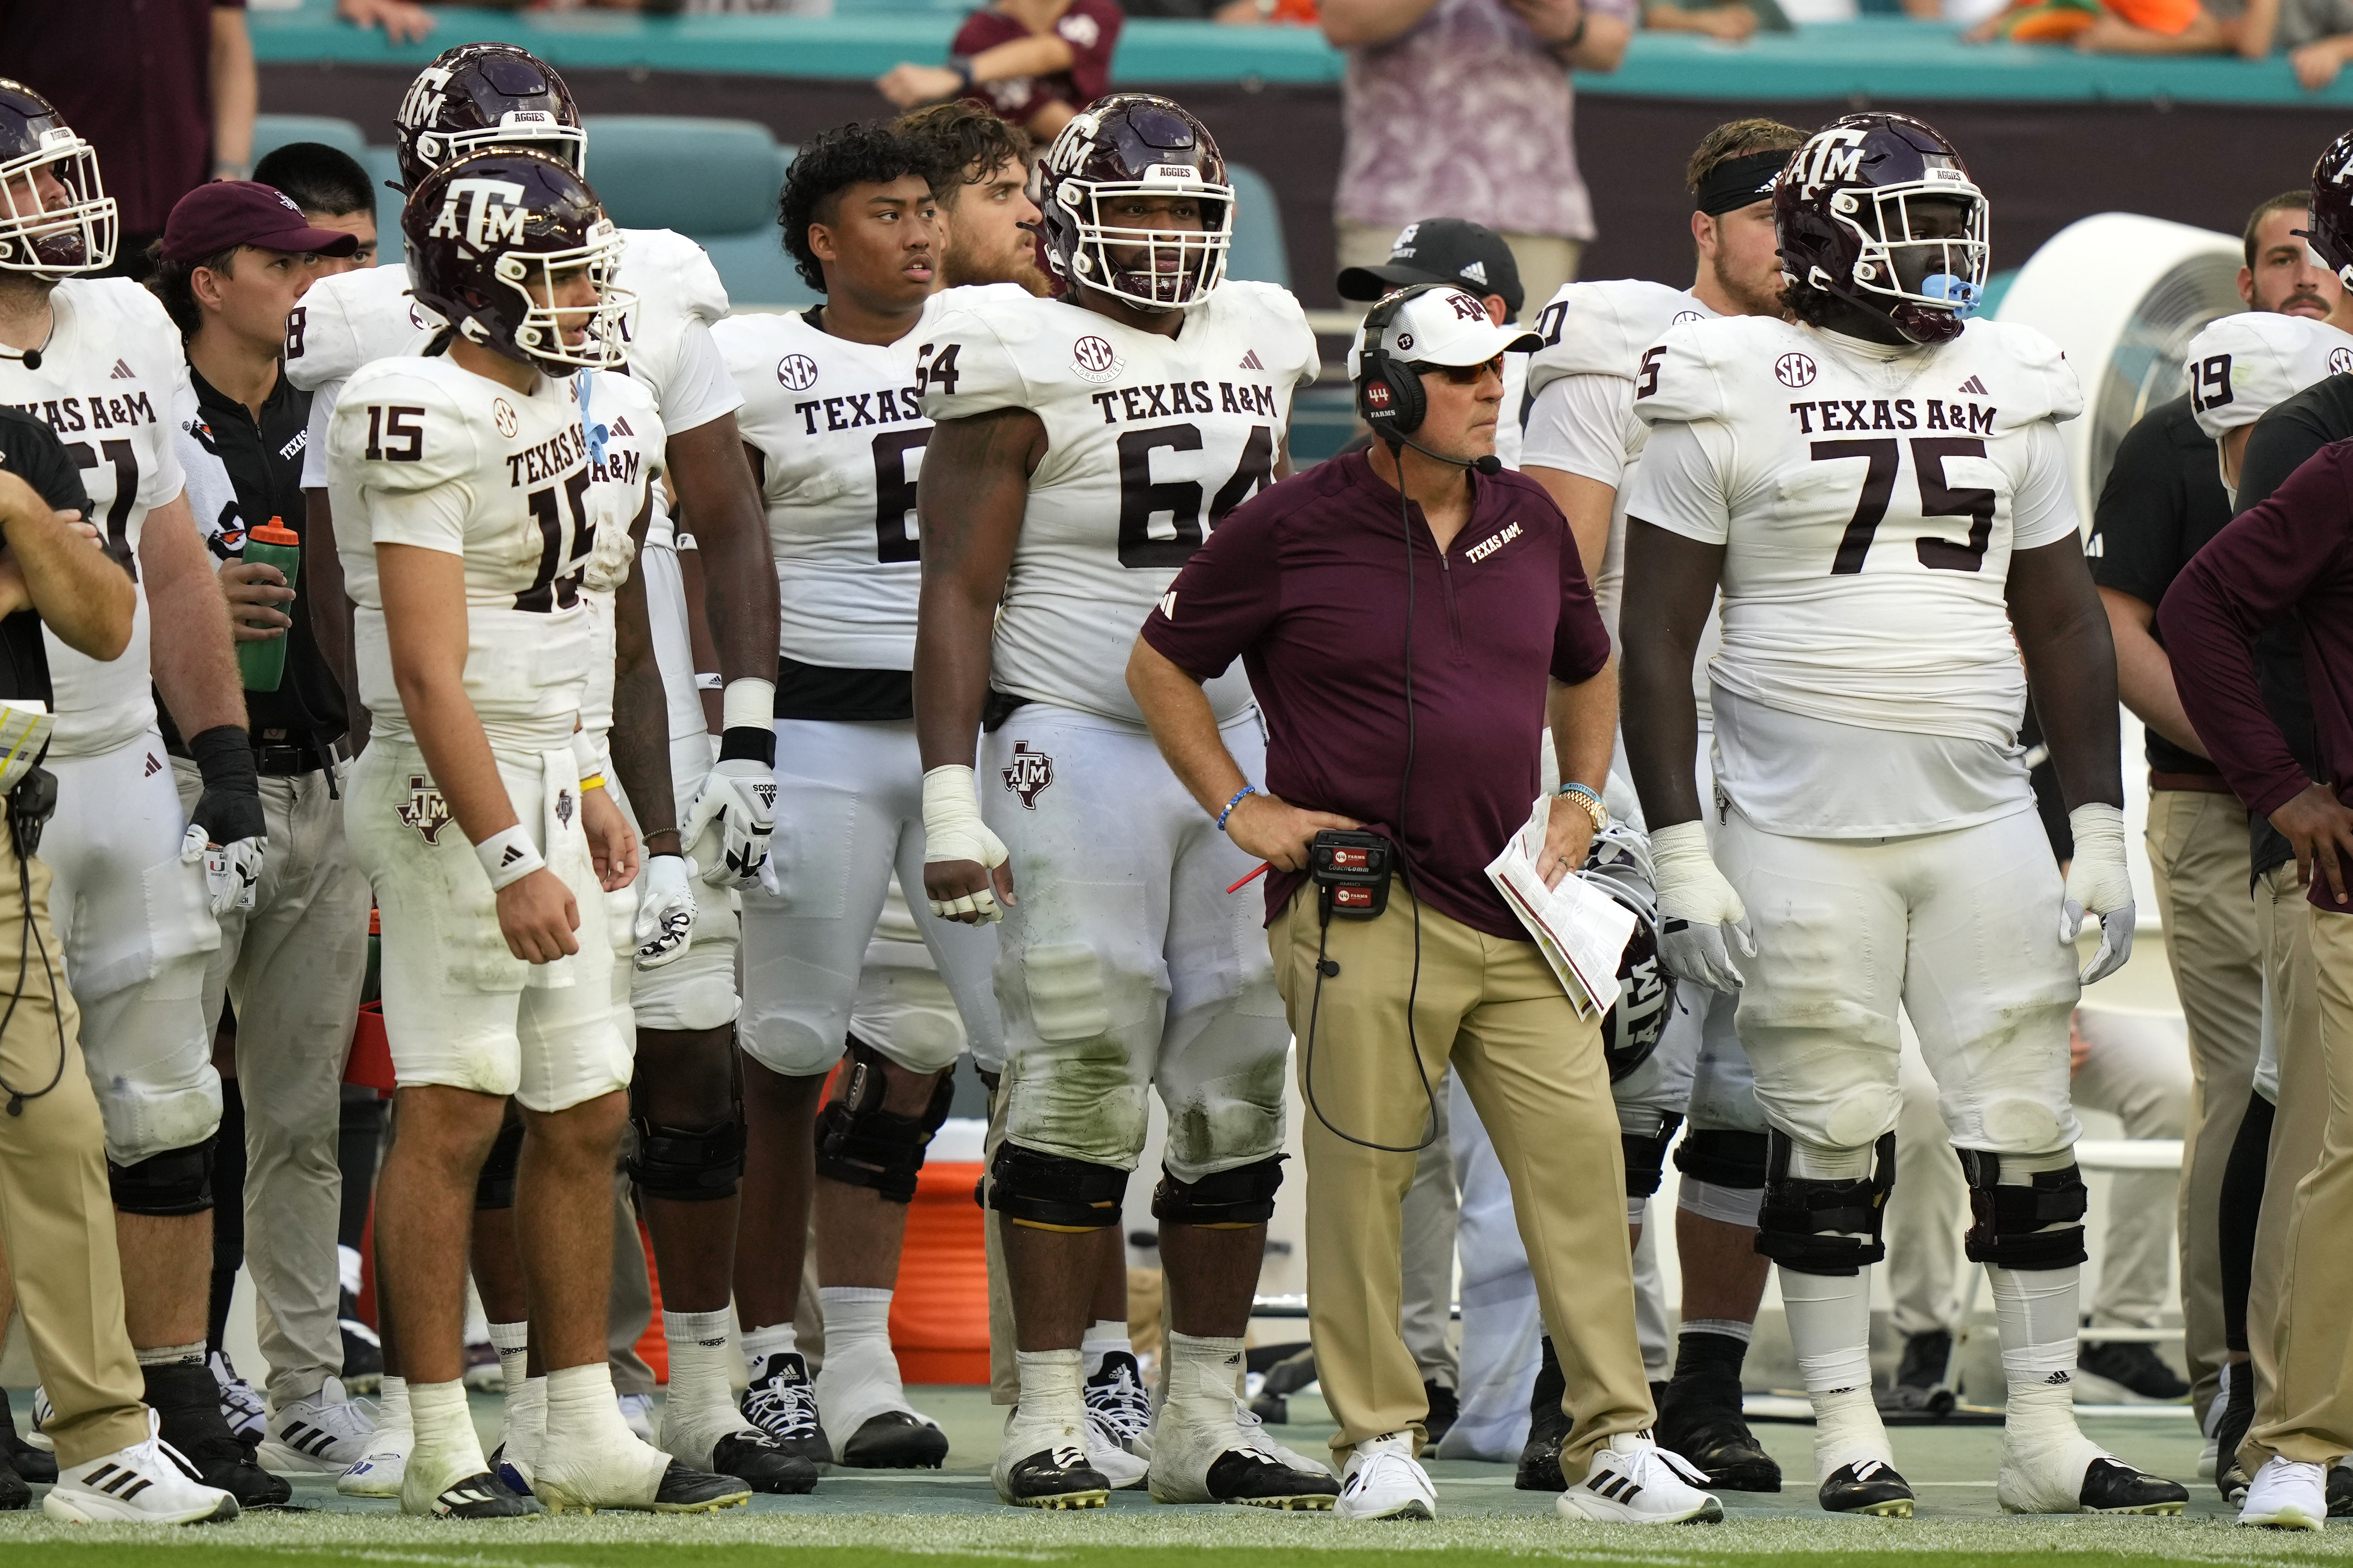 Aggie Football: National media predictions for Texas A&M vs Tennessee